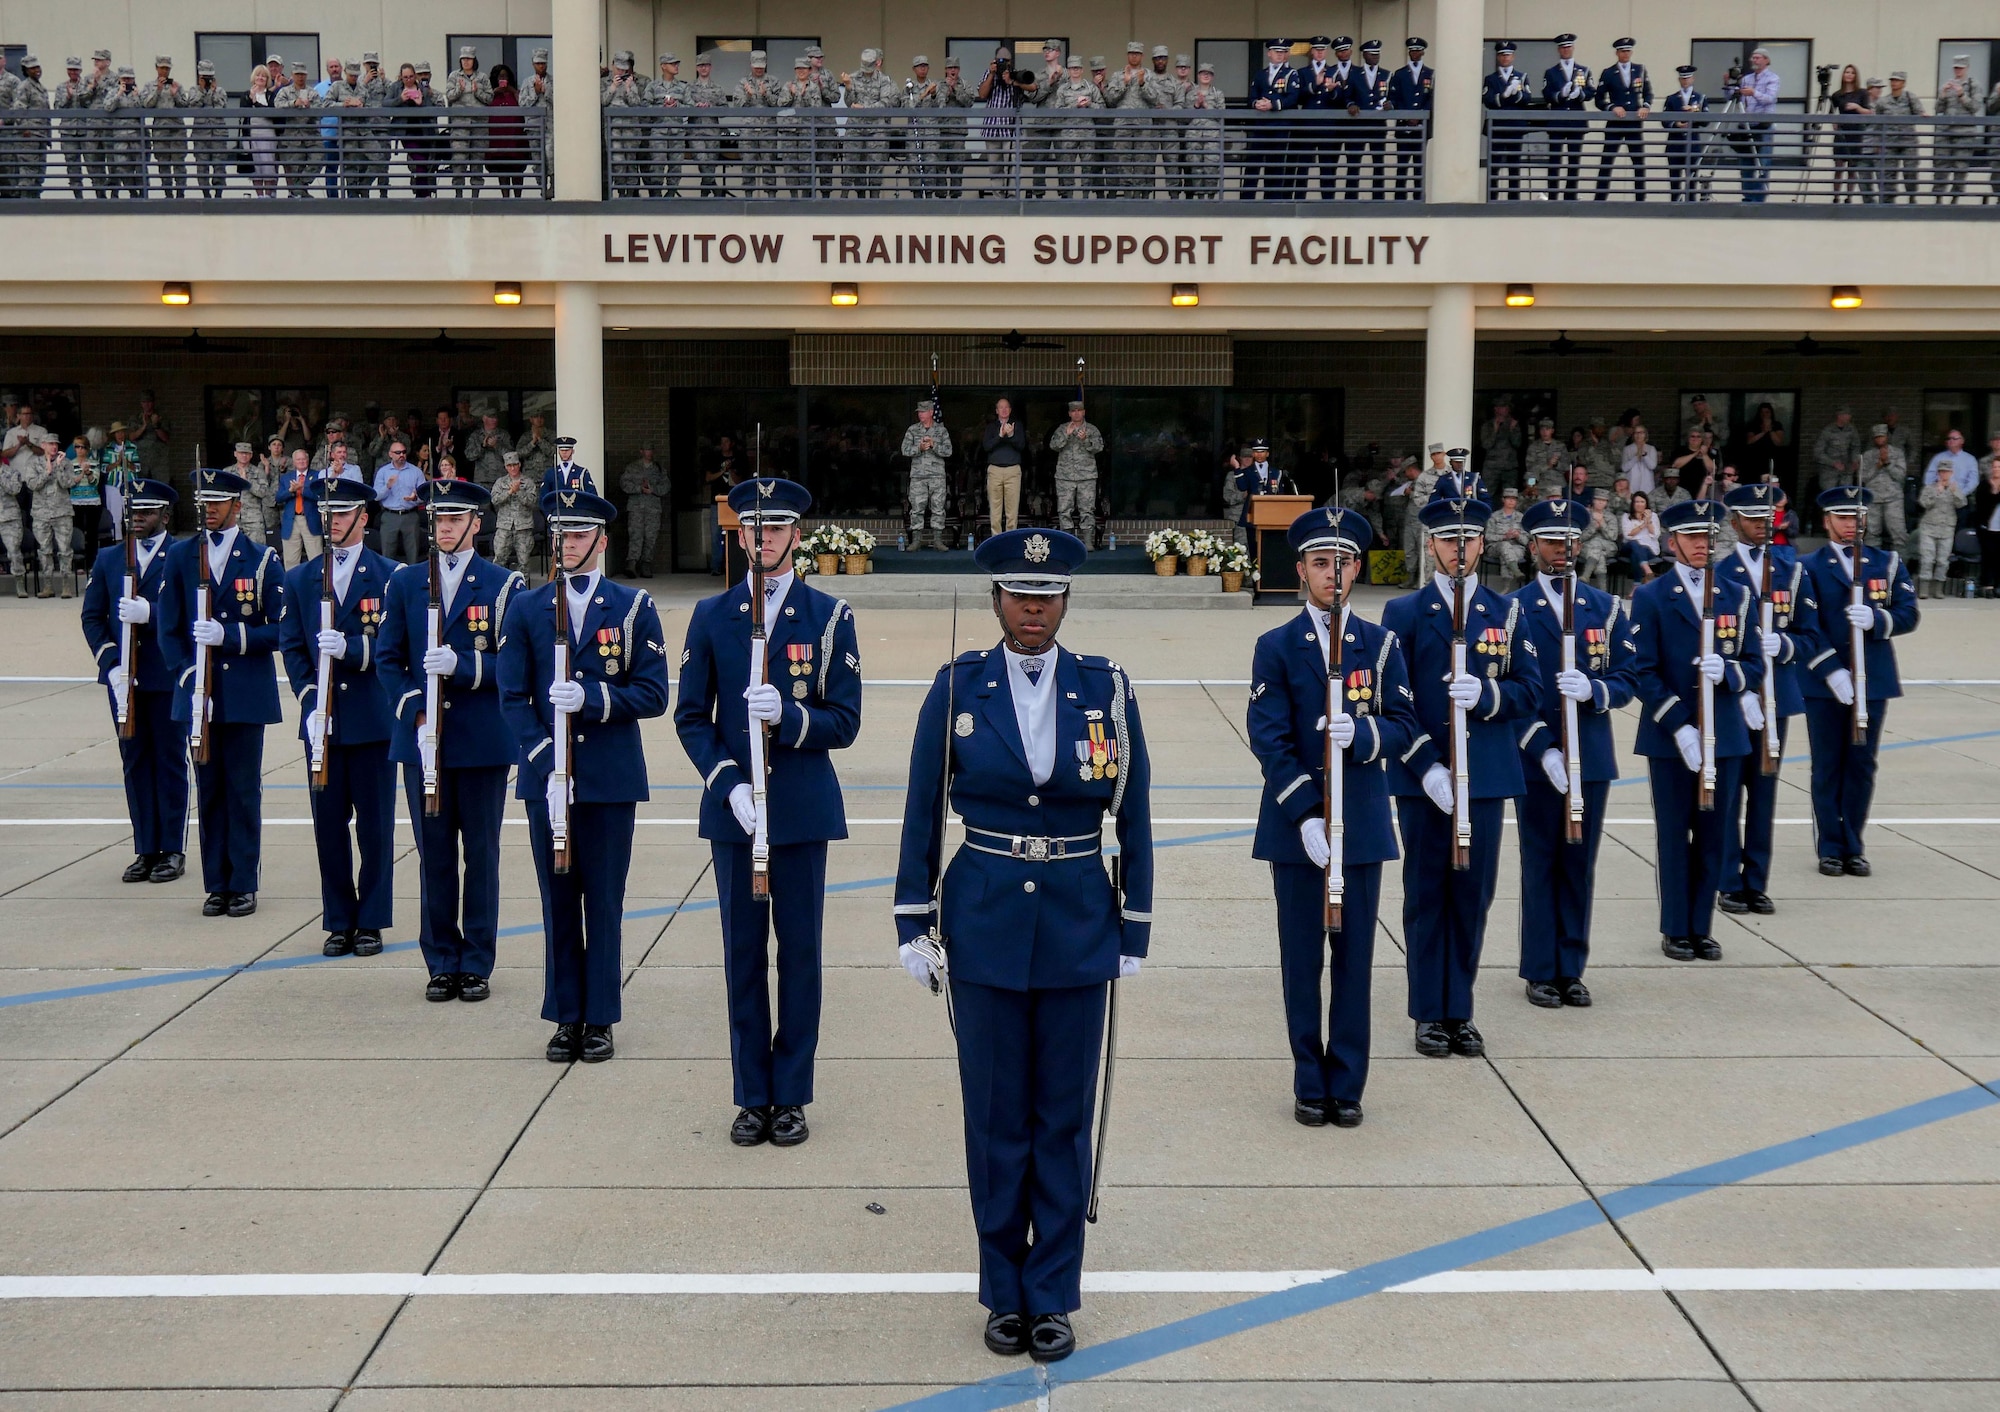 The U.S. Air Force Honor Guard Drill Team debuts their 2017 routine during the 81st Training Group drill down at the Levitow Training Support Facility drill pad March 10, 2017, on Keesler Air Force Base, Miss. The team comes to Keesler every year for five weeks to develop a new routine that they will use throughout the year. (U.S. Air Force photo by Capt. David J. Murphy)